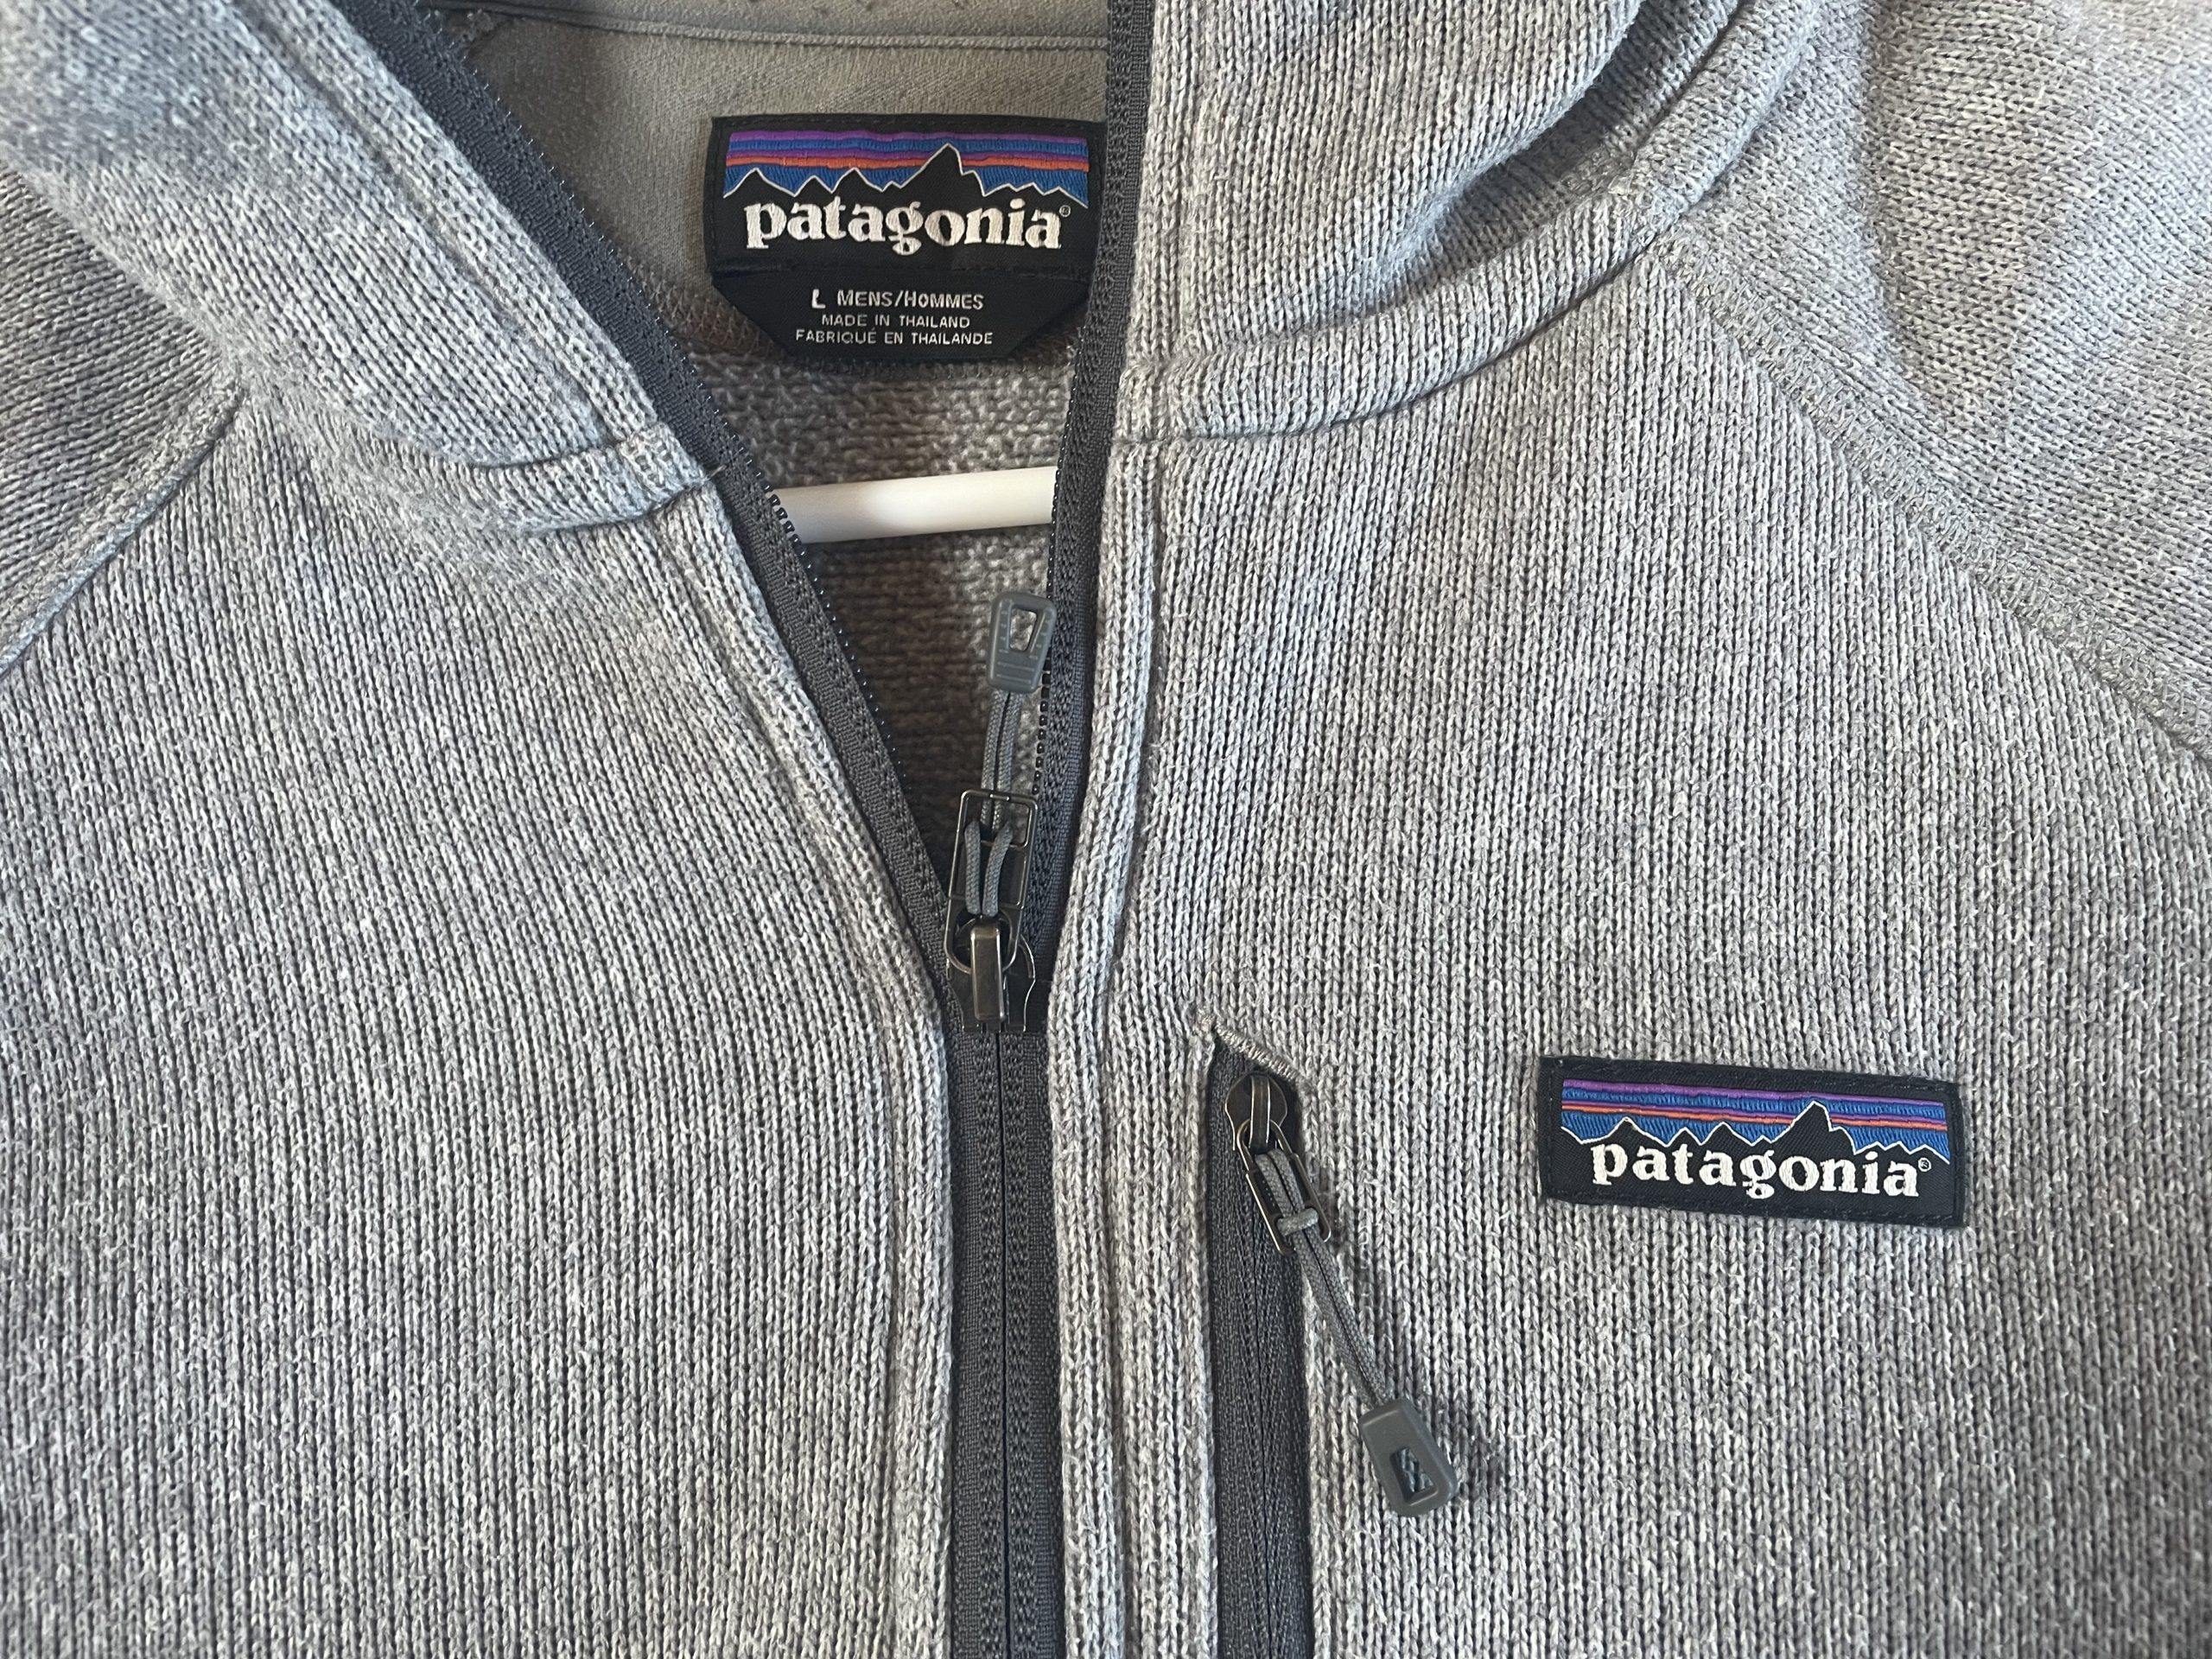 Is Patagonia Worth The Price? – The Patagonia Paradox | The Off Brand Guy